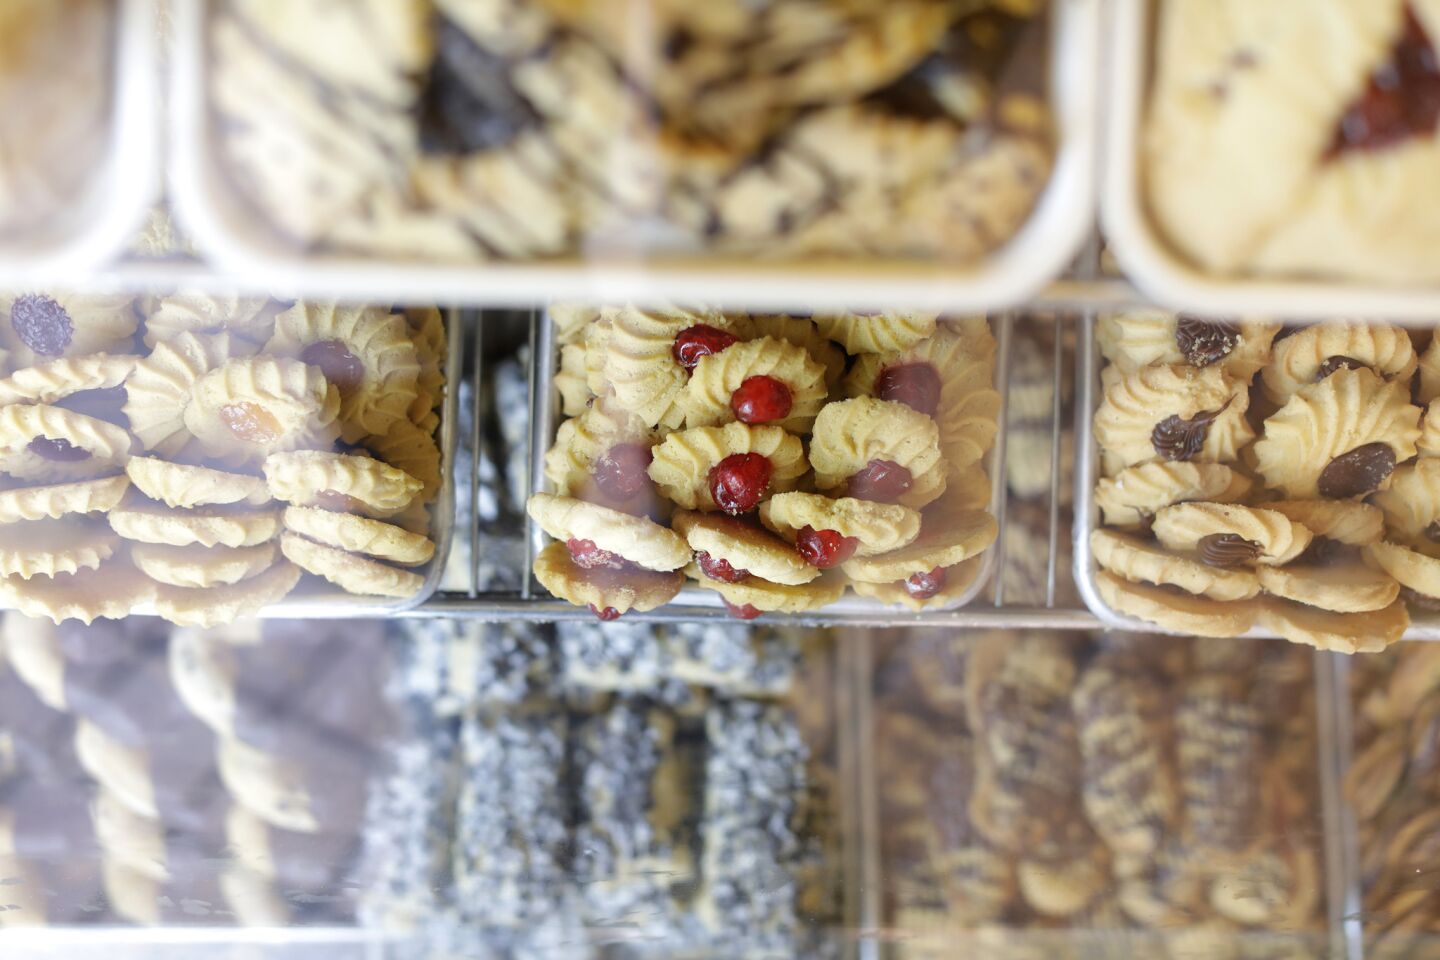 Cookies tempt in the bakery section at Canter's.